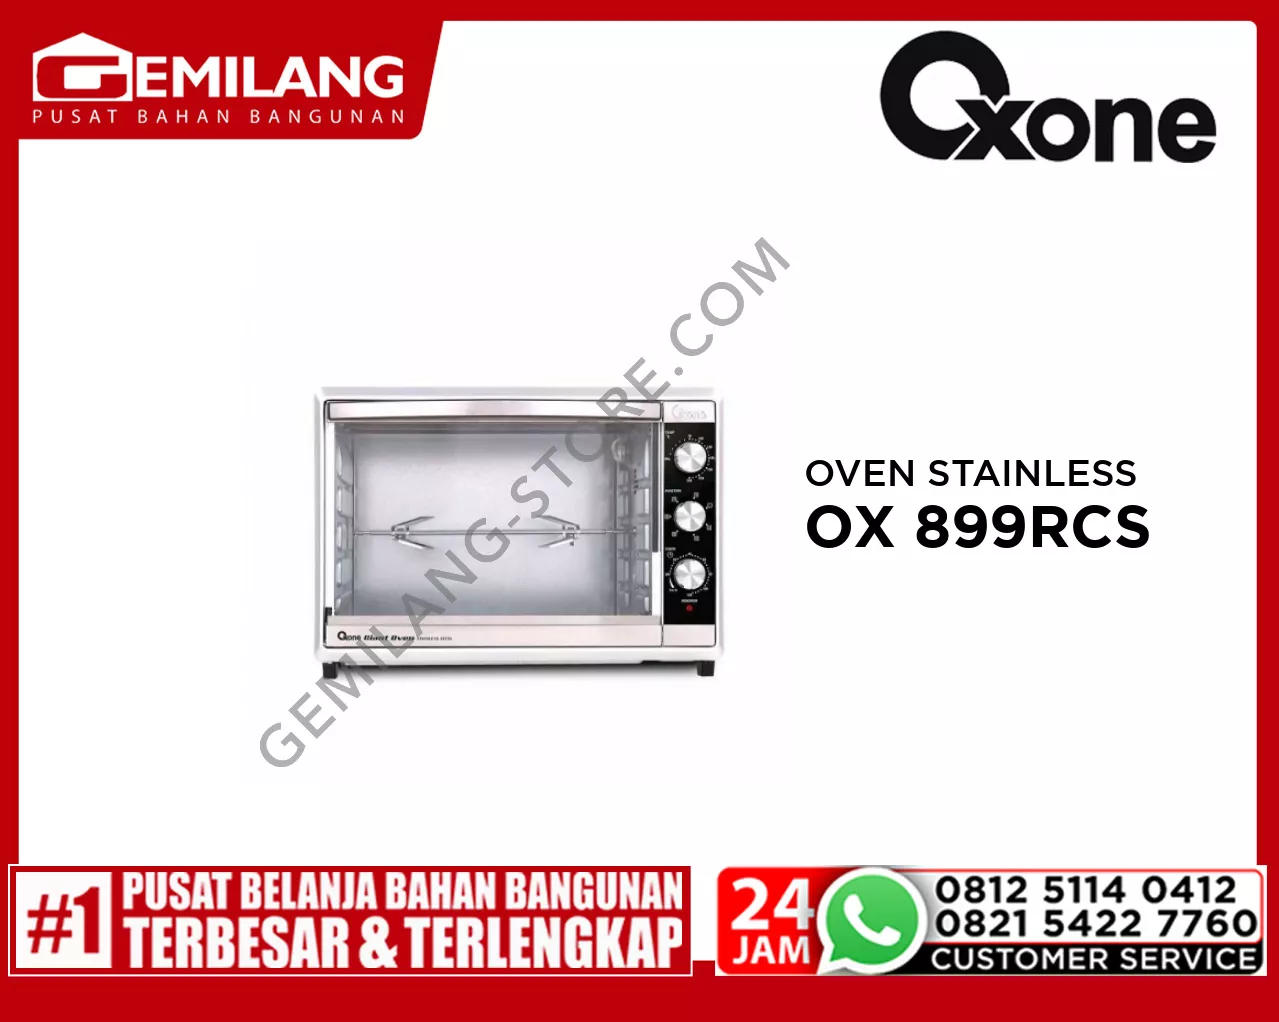 OXONE GIANT OVEN STAINLESS STELL 52ltr OX 899RCS